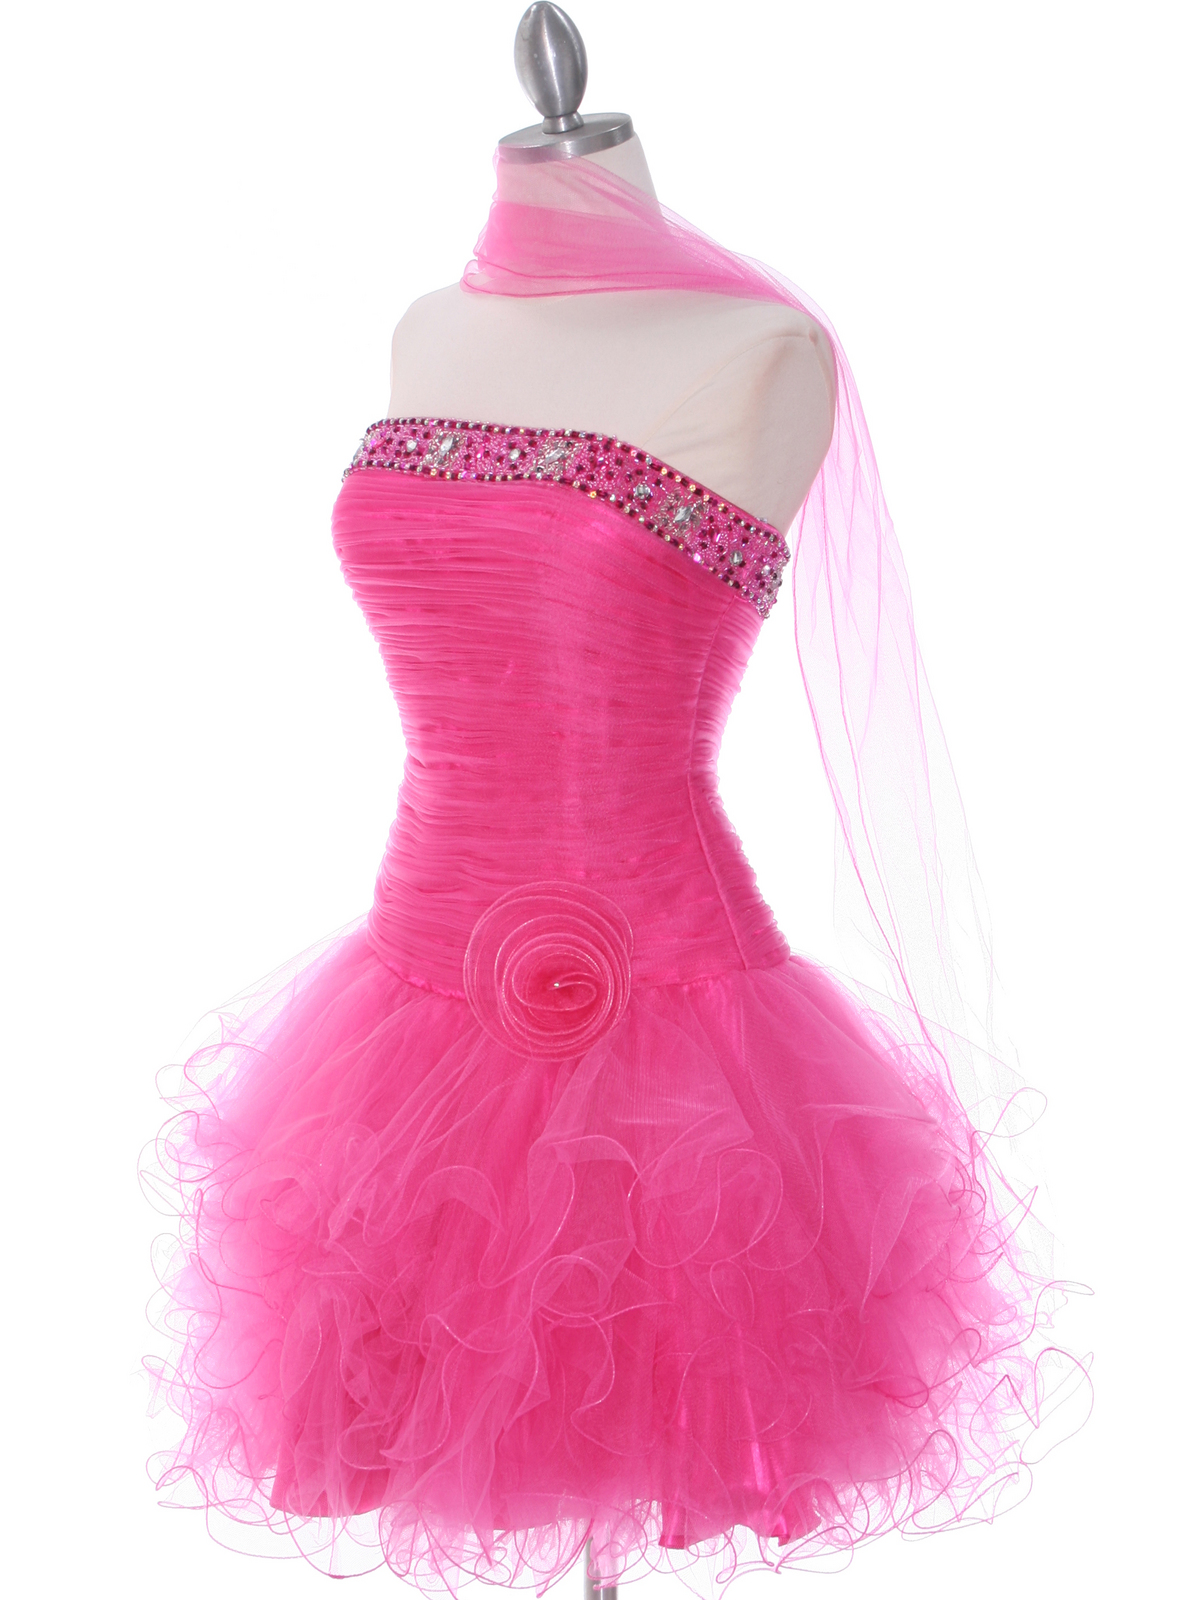 hot pink and black dress on Hot Pink Short Prom Dresses  Hot Pink Beaded Cocktail Dress  Women S